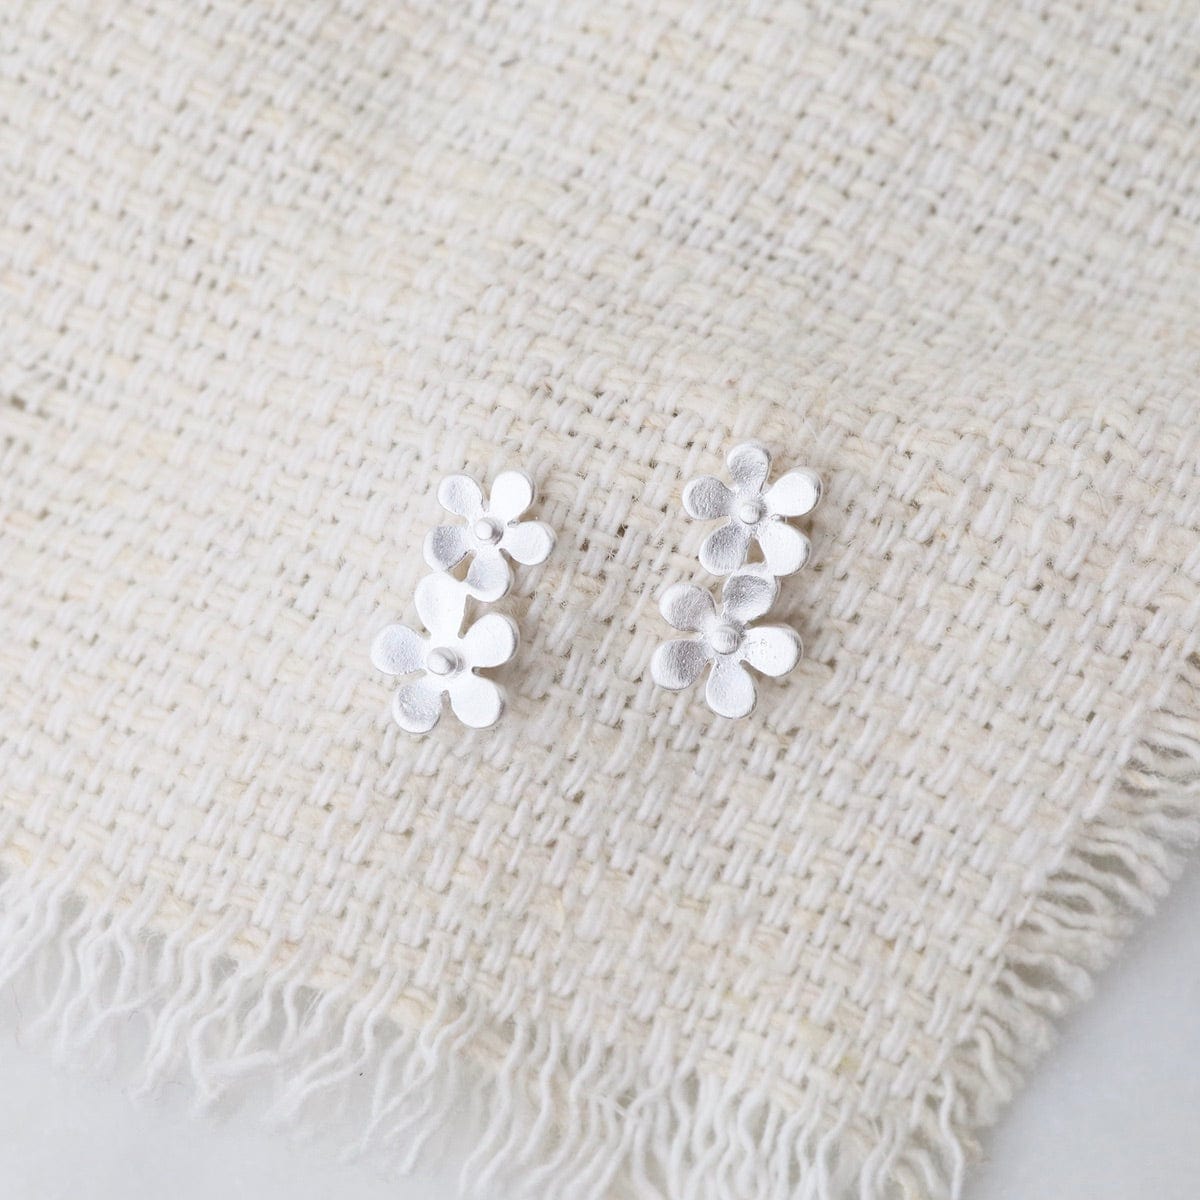 EAR Double Forget-Me-Not Stud Earrings - Brushed Sterling Silver